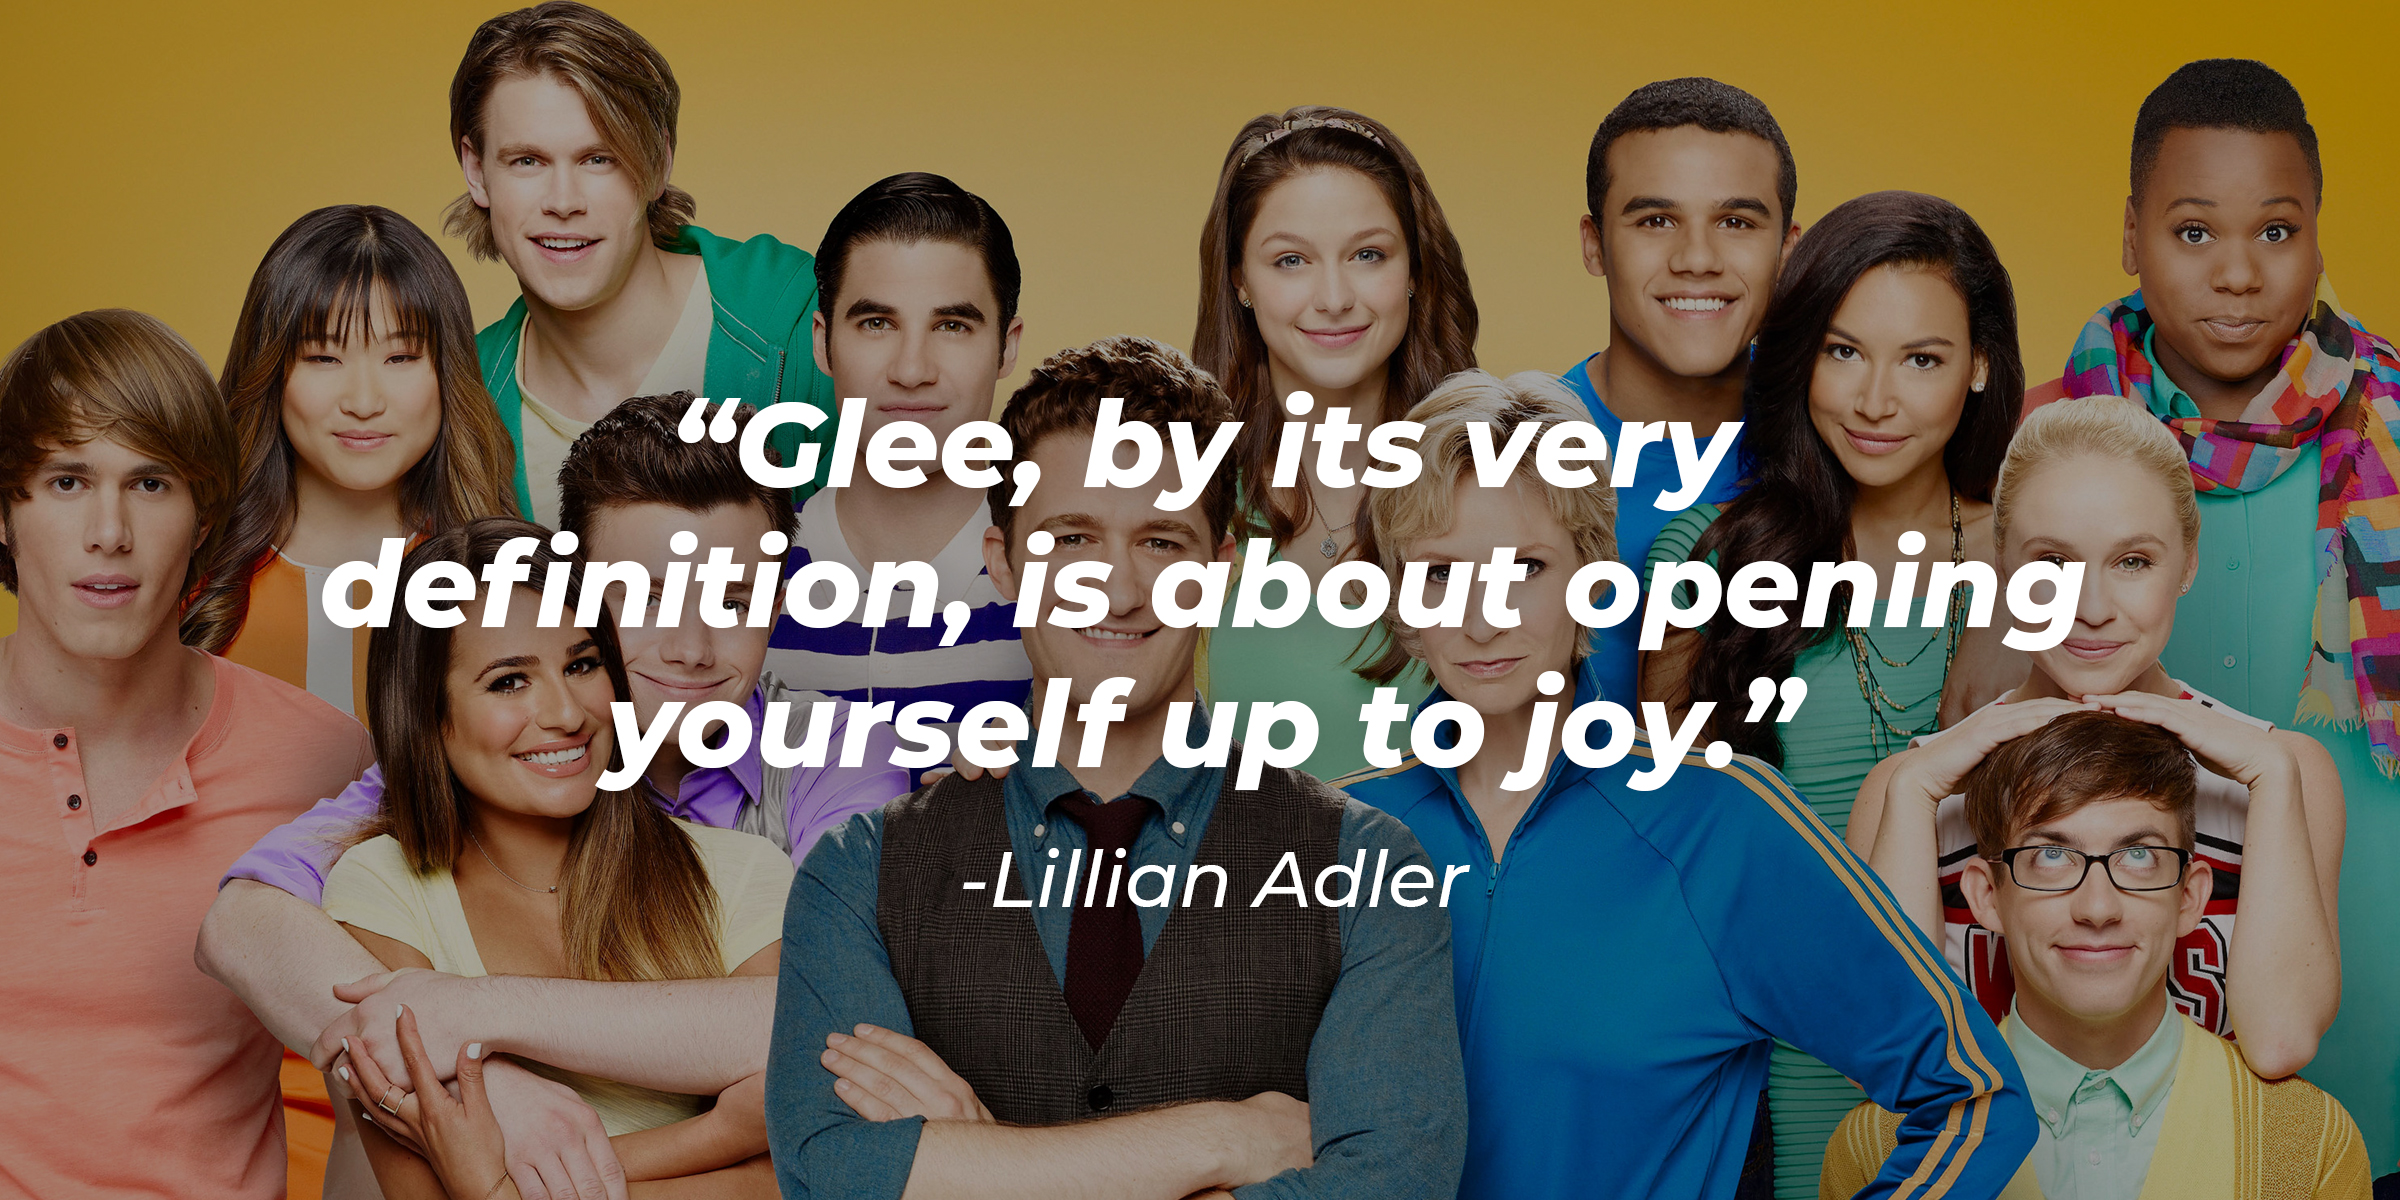 Lillian Adler’s quote: “Glee, by its very definition, is about opening yourself up to joy.” | Image: Getty Images